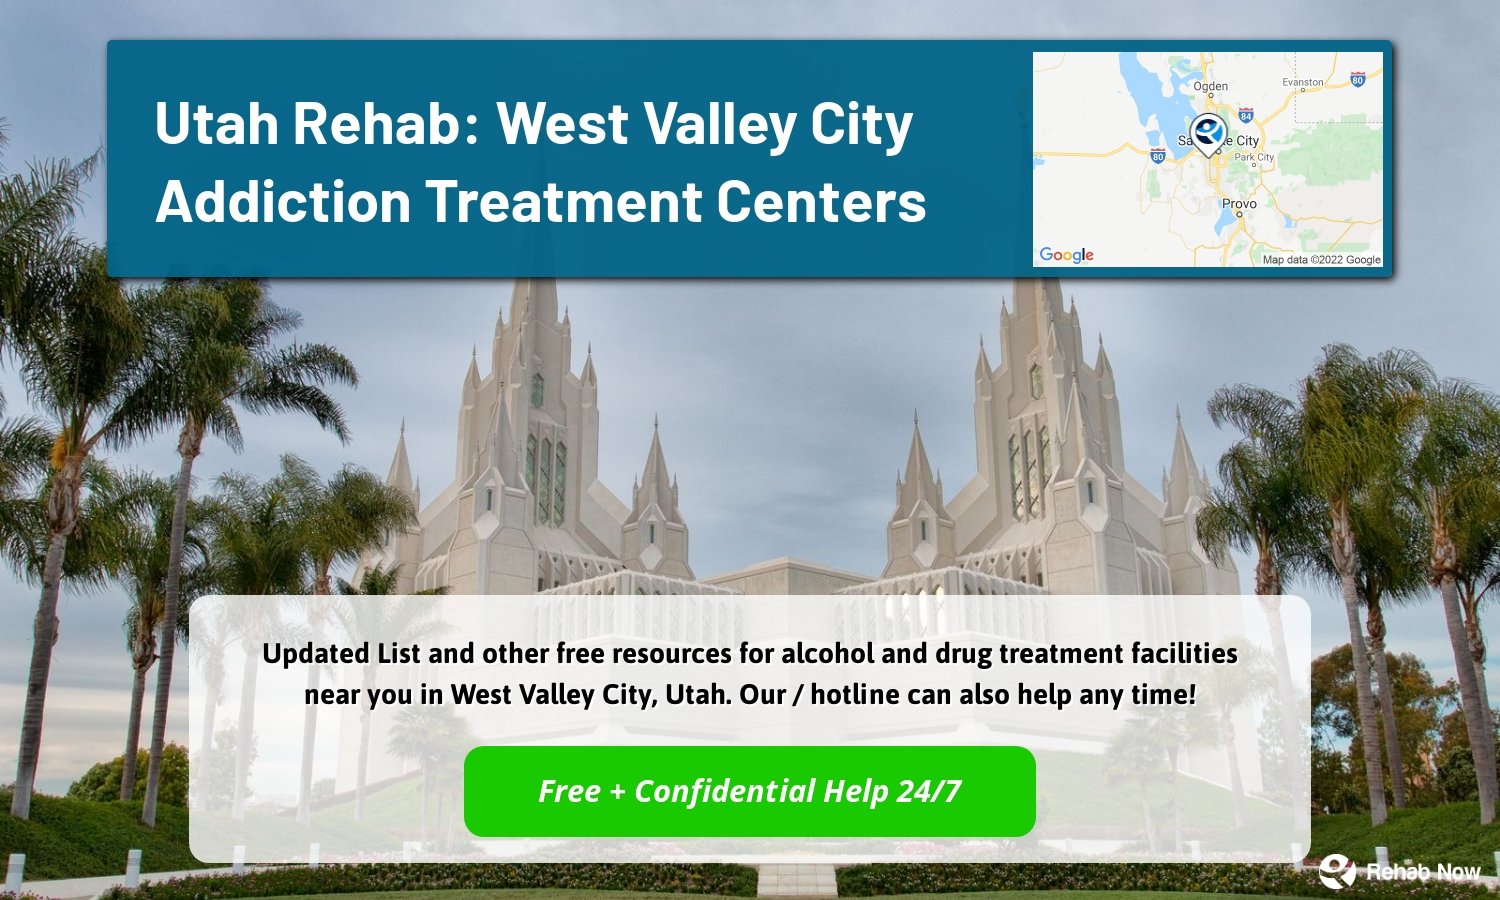  Updated List and other free resources for alcohol and drug treatment facilities near you in West Valley City, Utah. Our / hotline can also help any time!